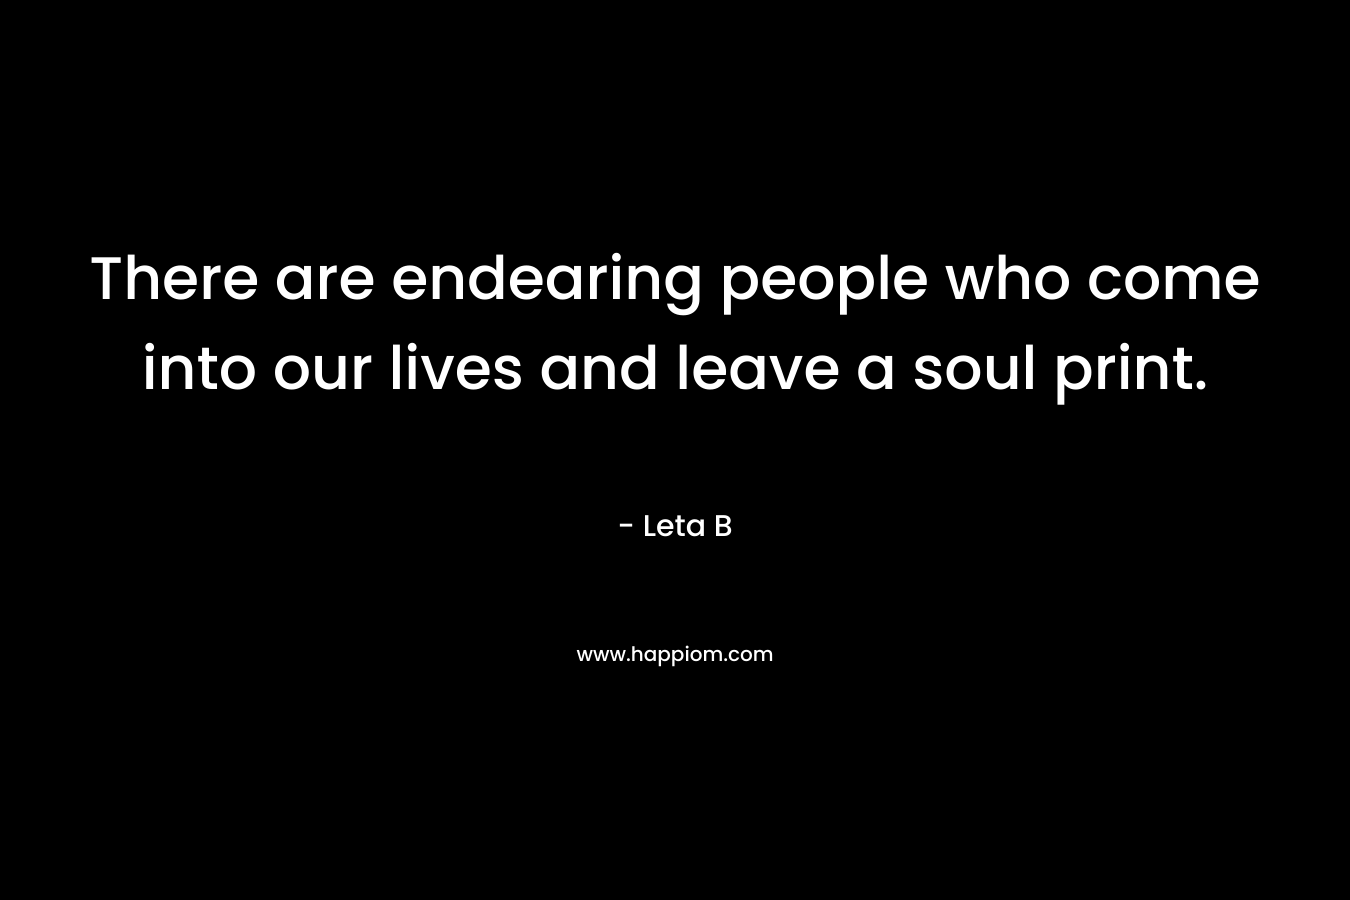 There are endearing people who come into our lives and leave a soul print.